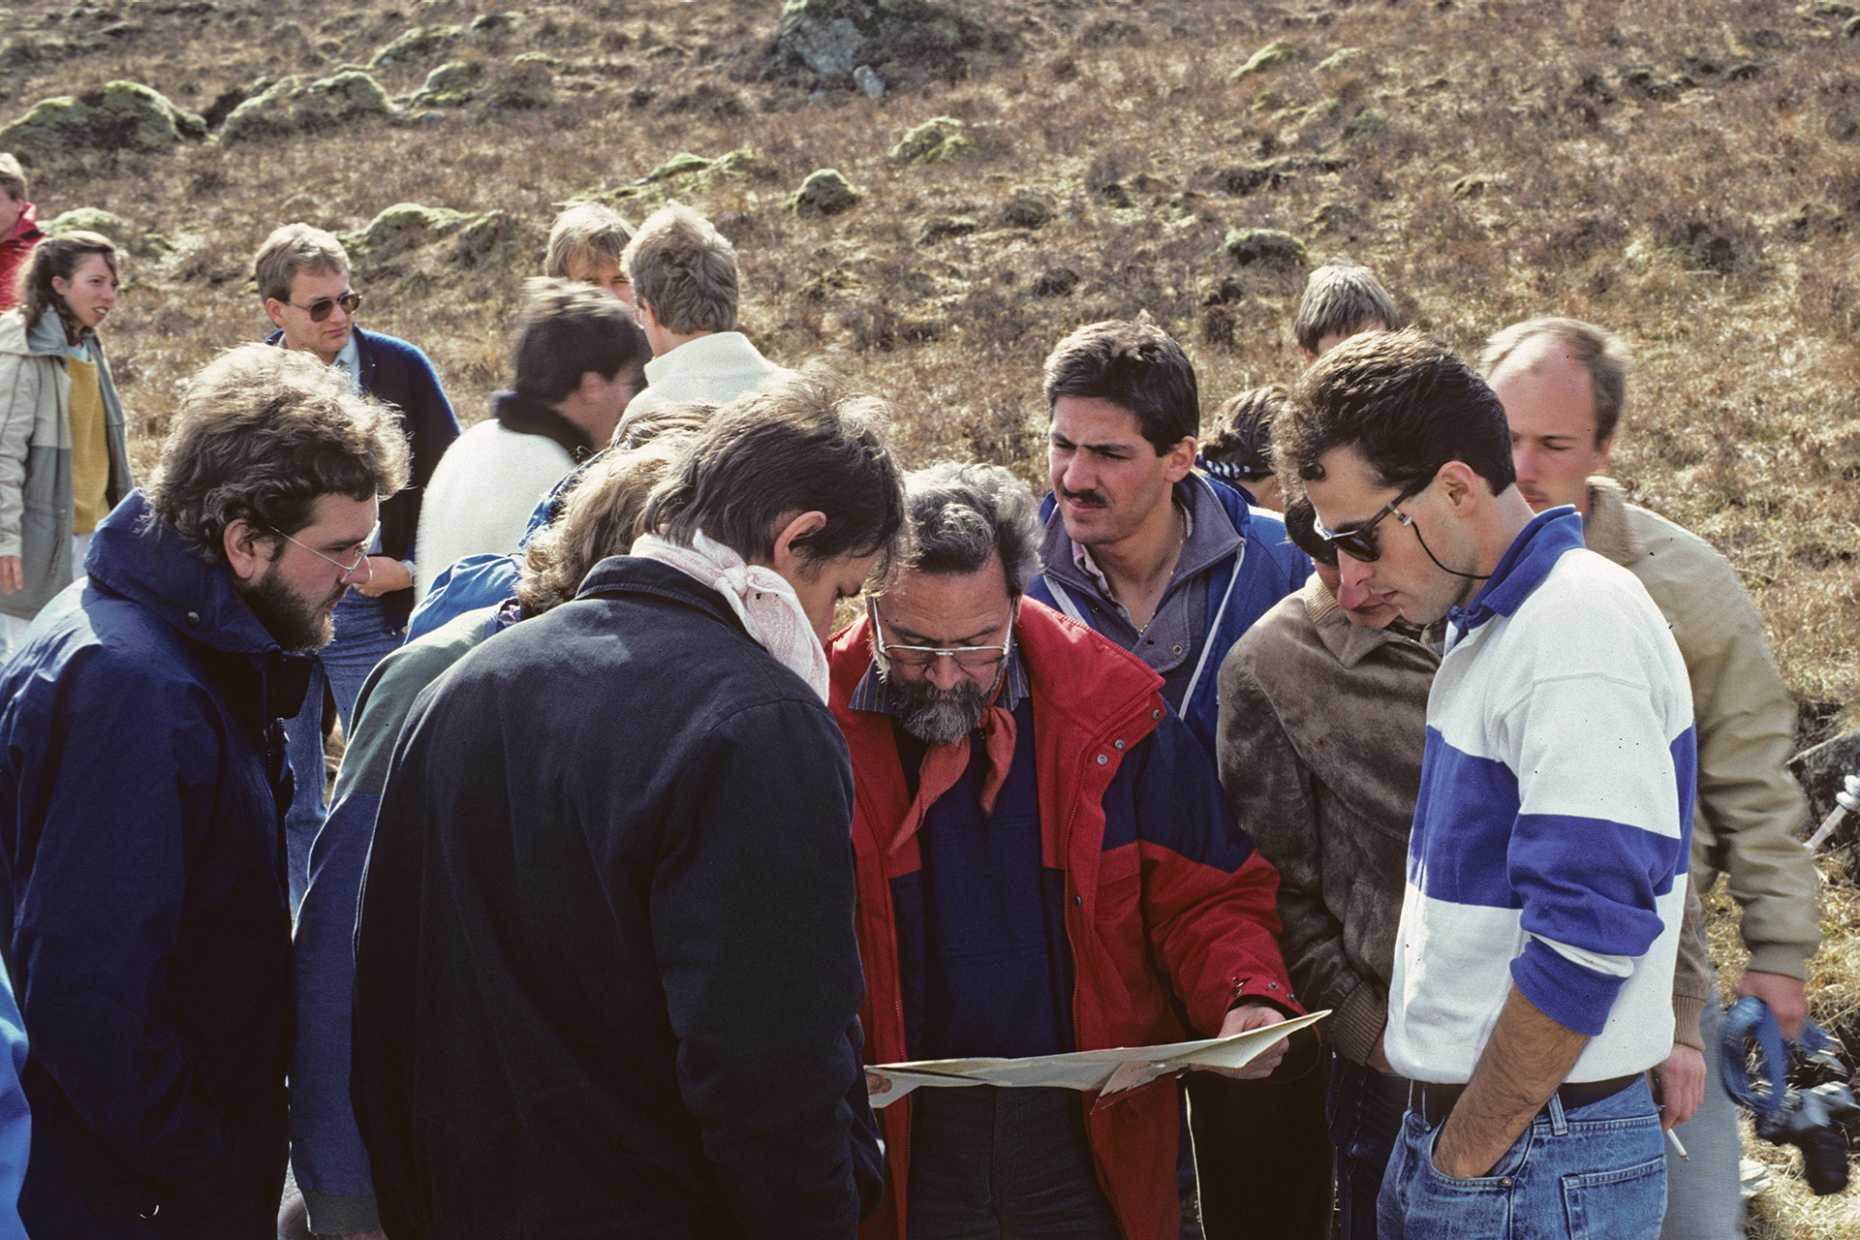 Image of John Ramsay during an excursion and mapping course in Scotland, 1986